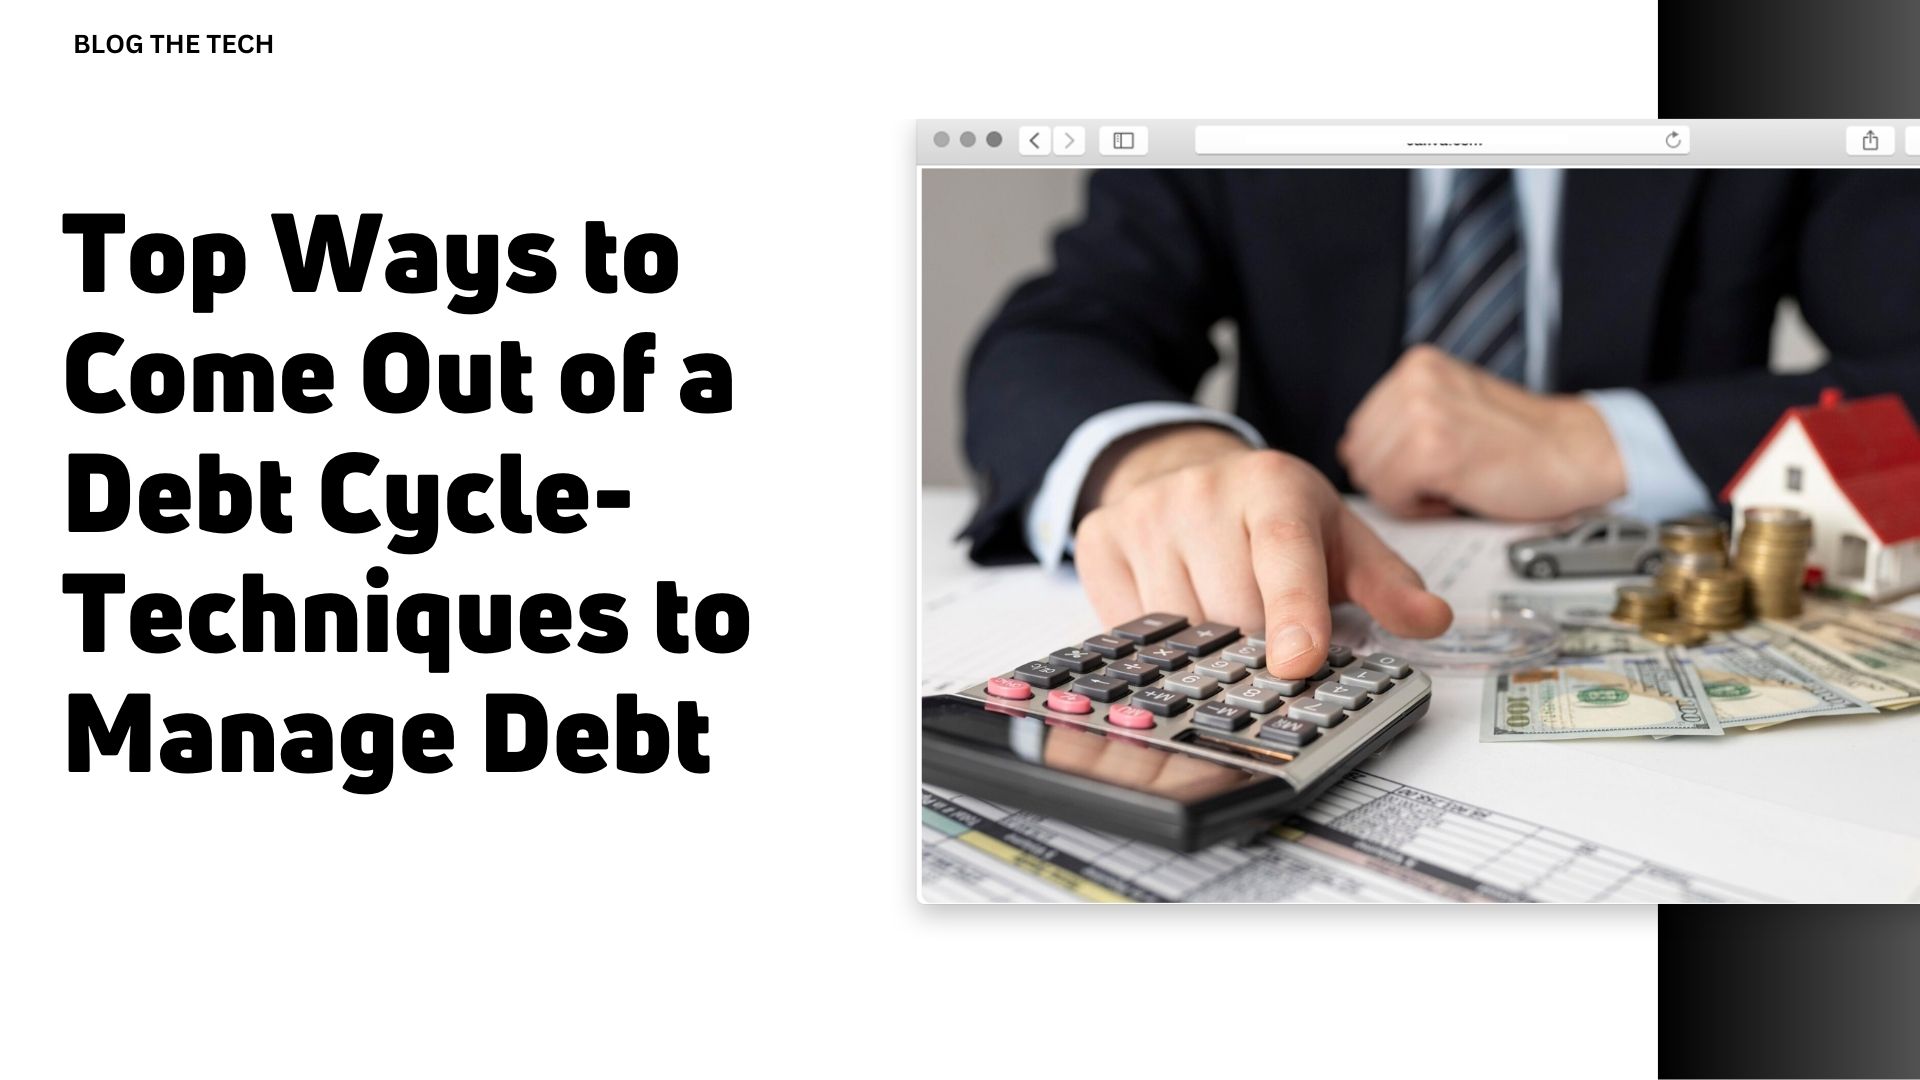 Top Ways to Come Out of a Debt Cycle Techniques to Manage Debt